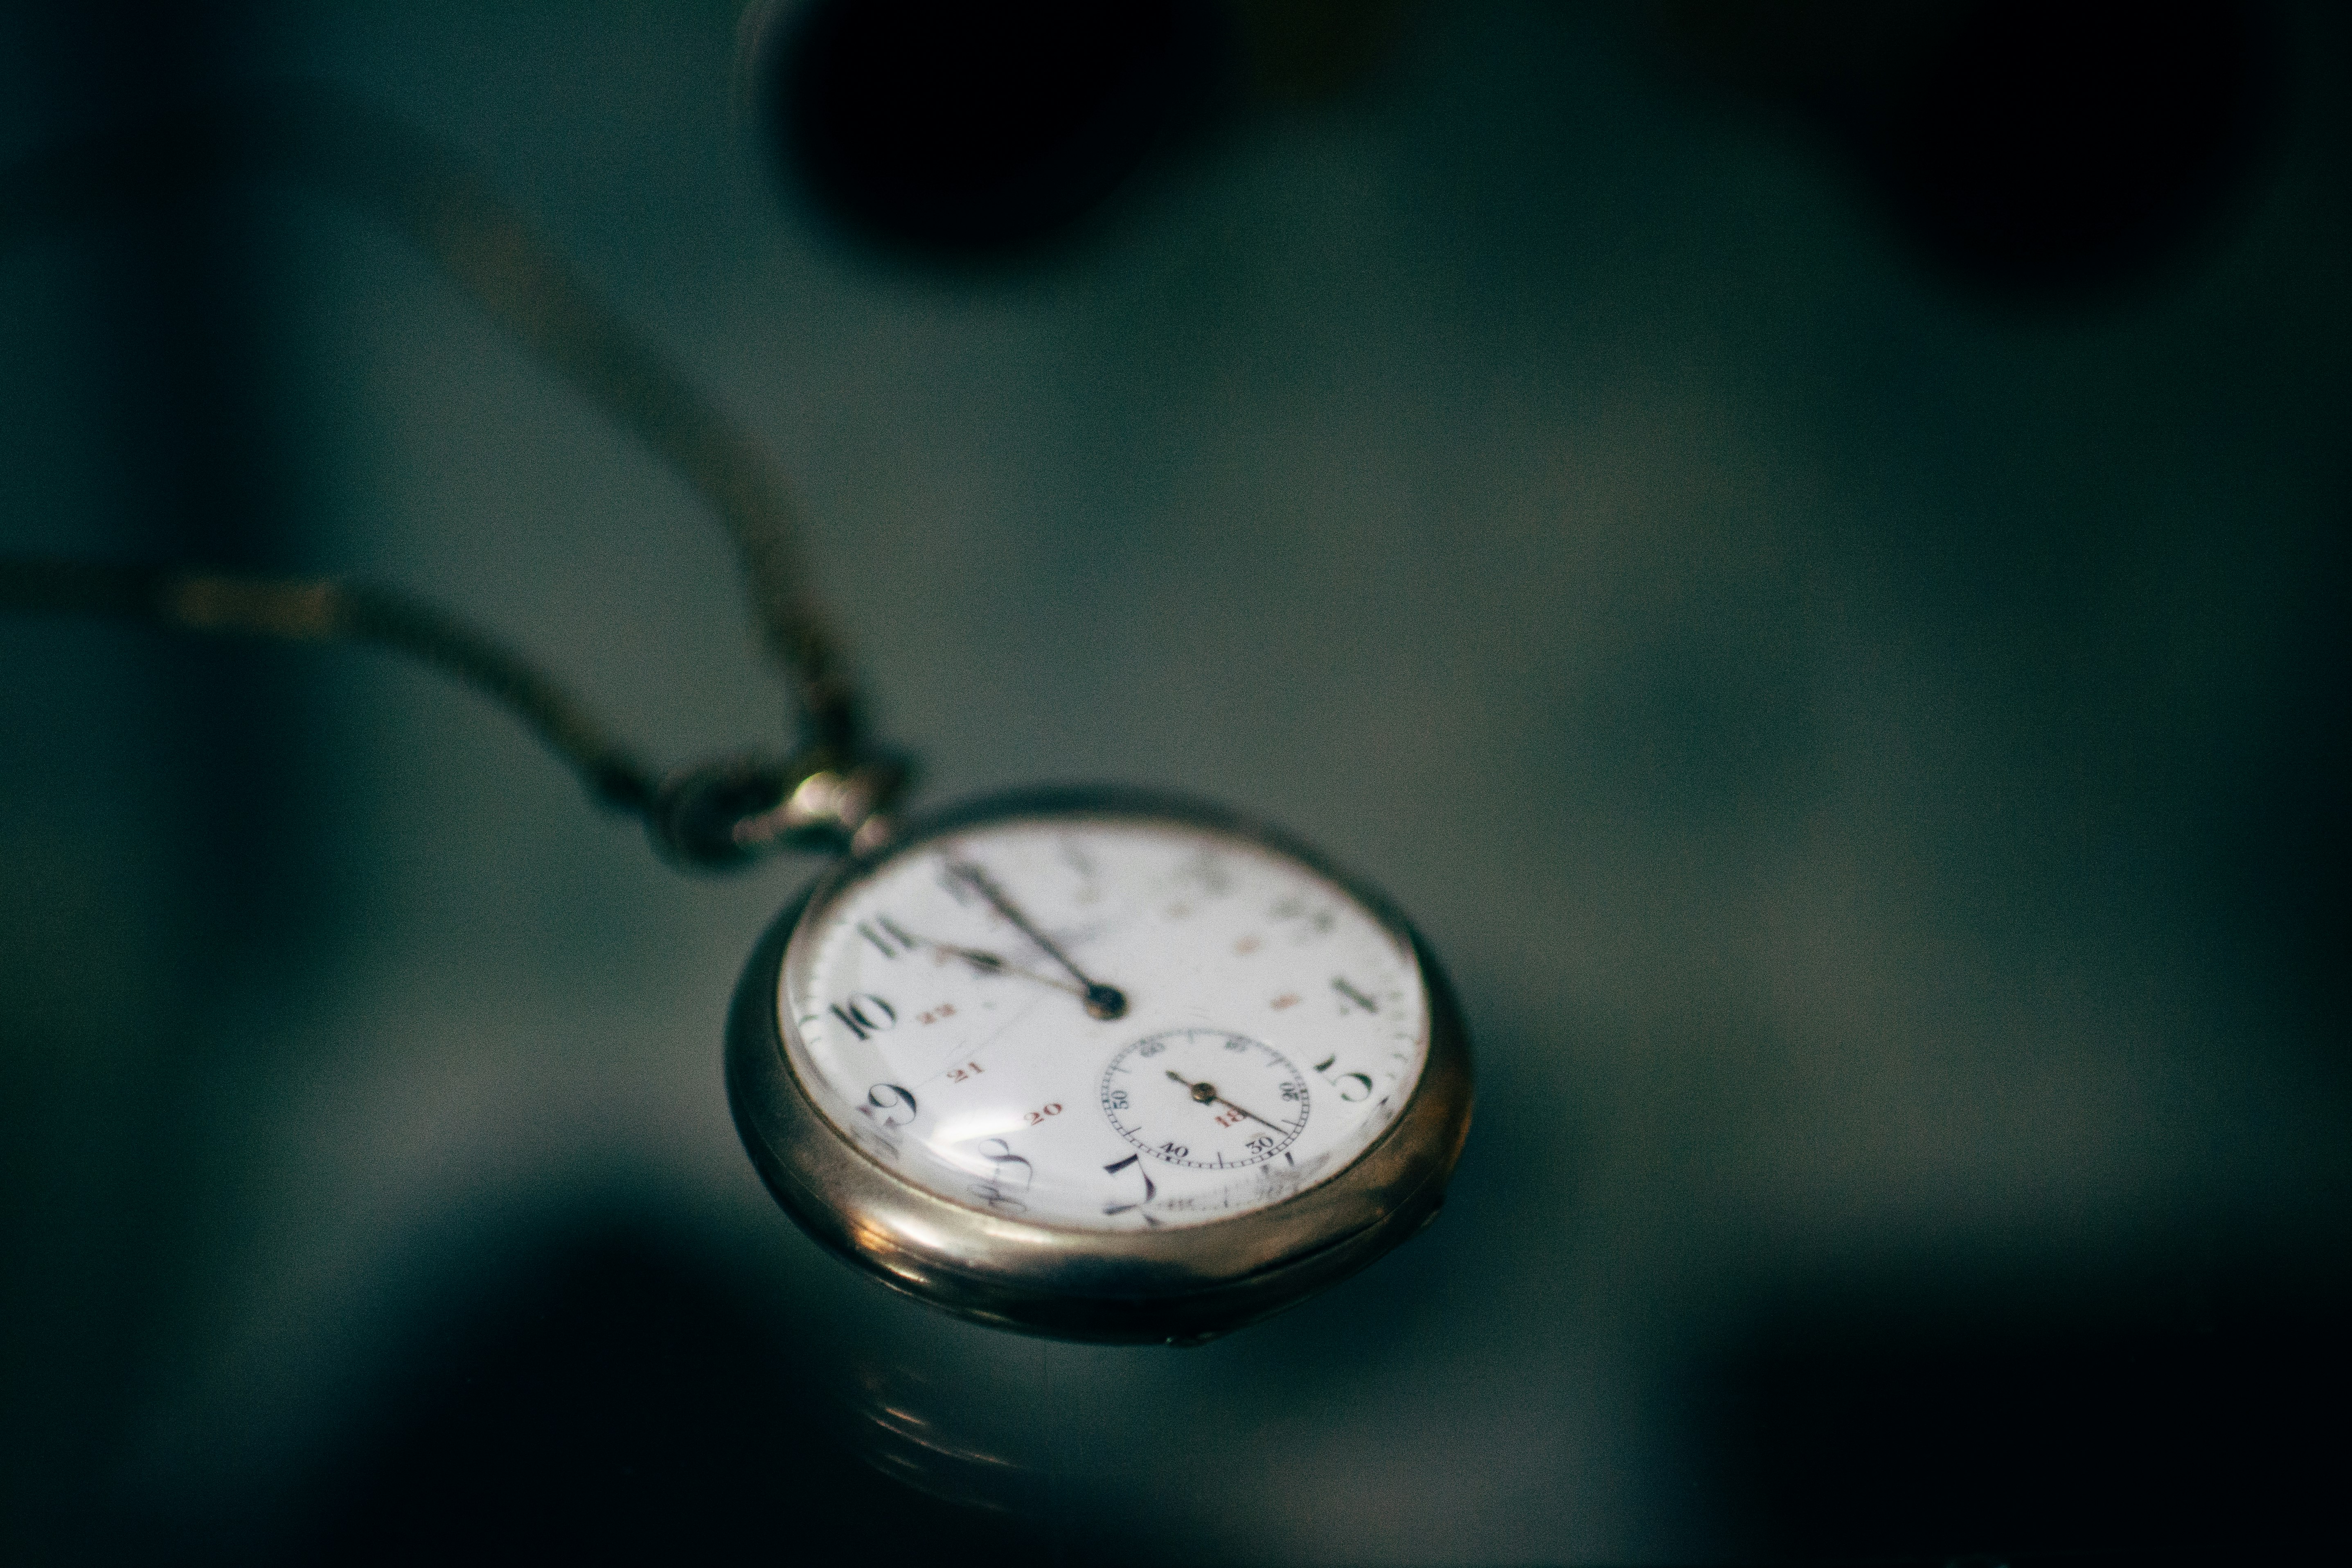 lowlight photography of white pocket watch